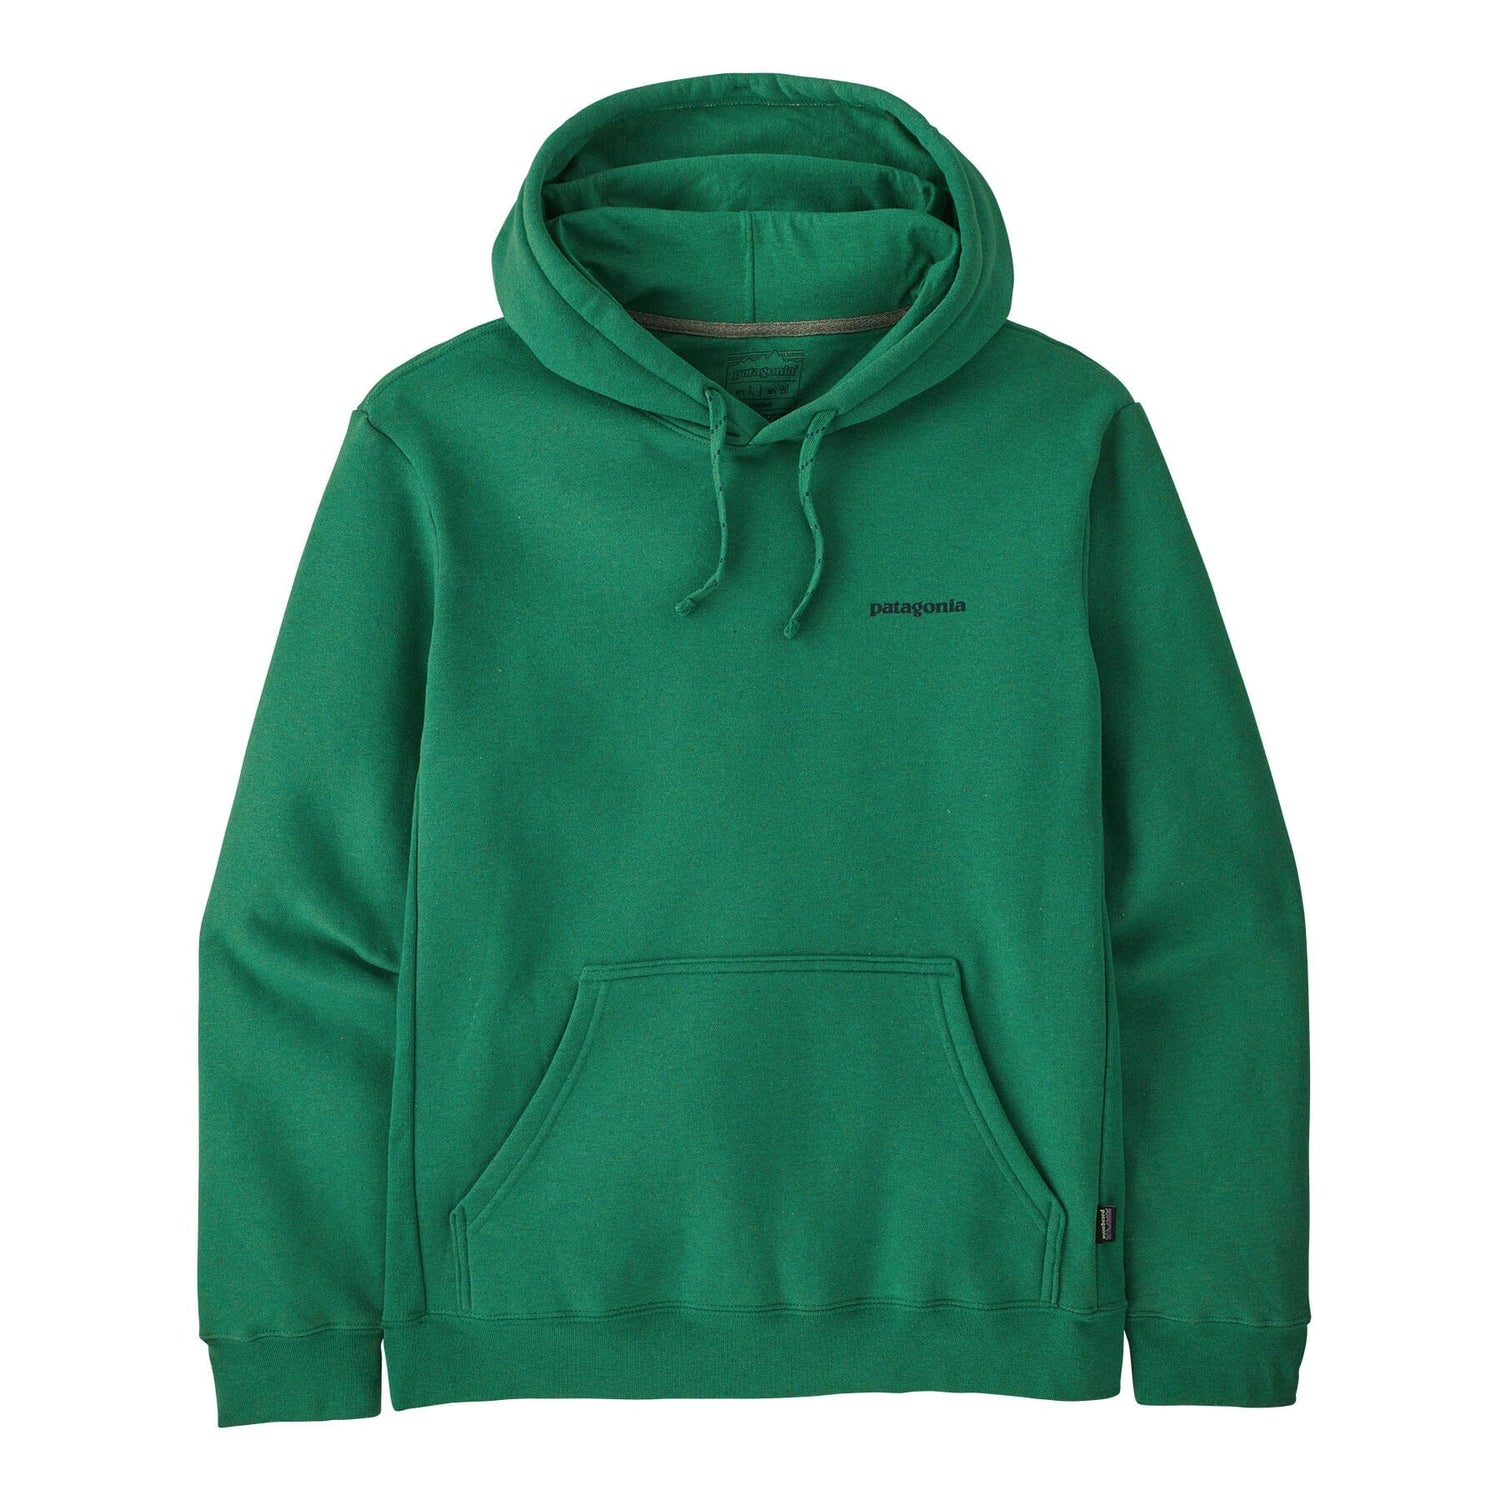 Patagonia Boardshort Logo Uprisal Hoody - Recycled polyester & recycled cotton fleece Gather Green Shirt